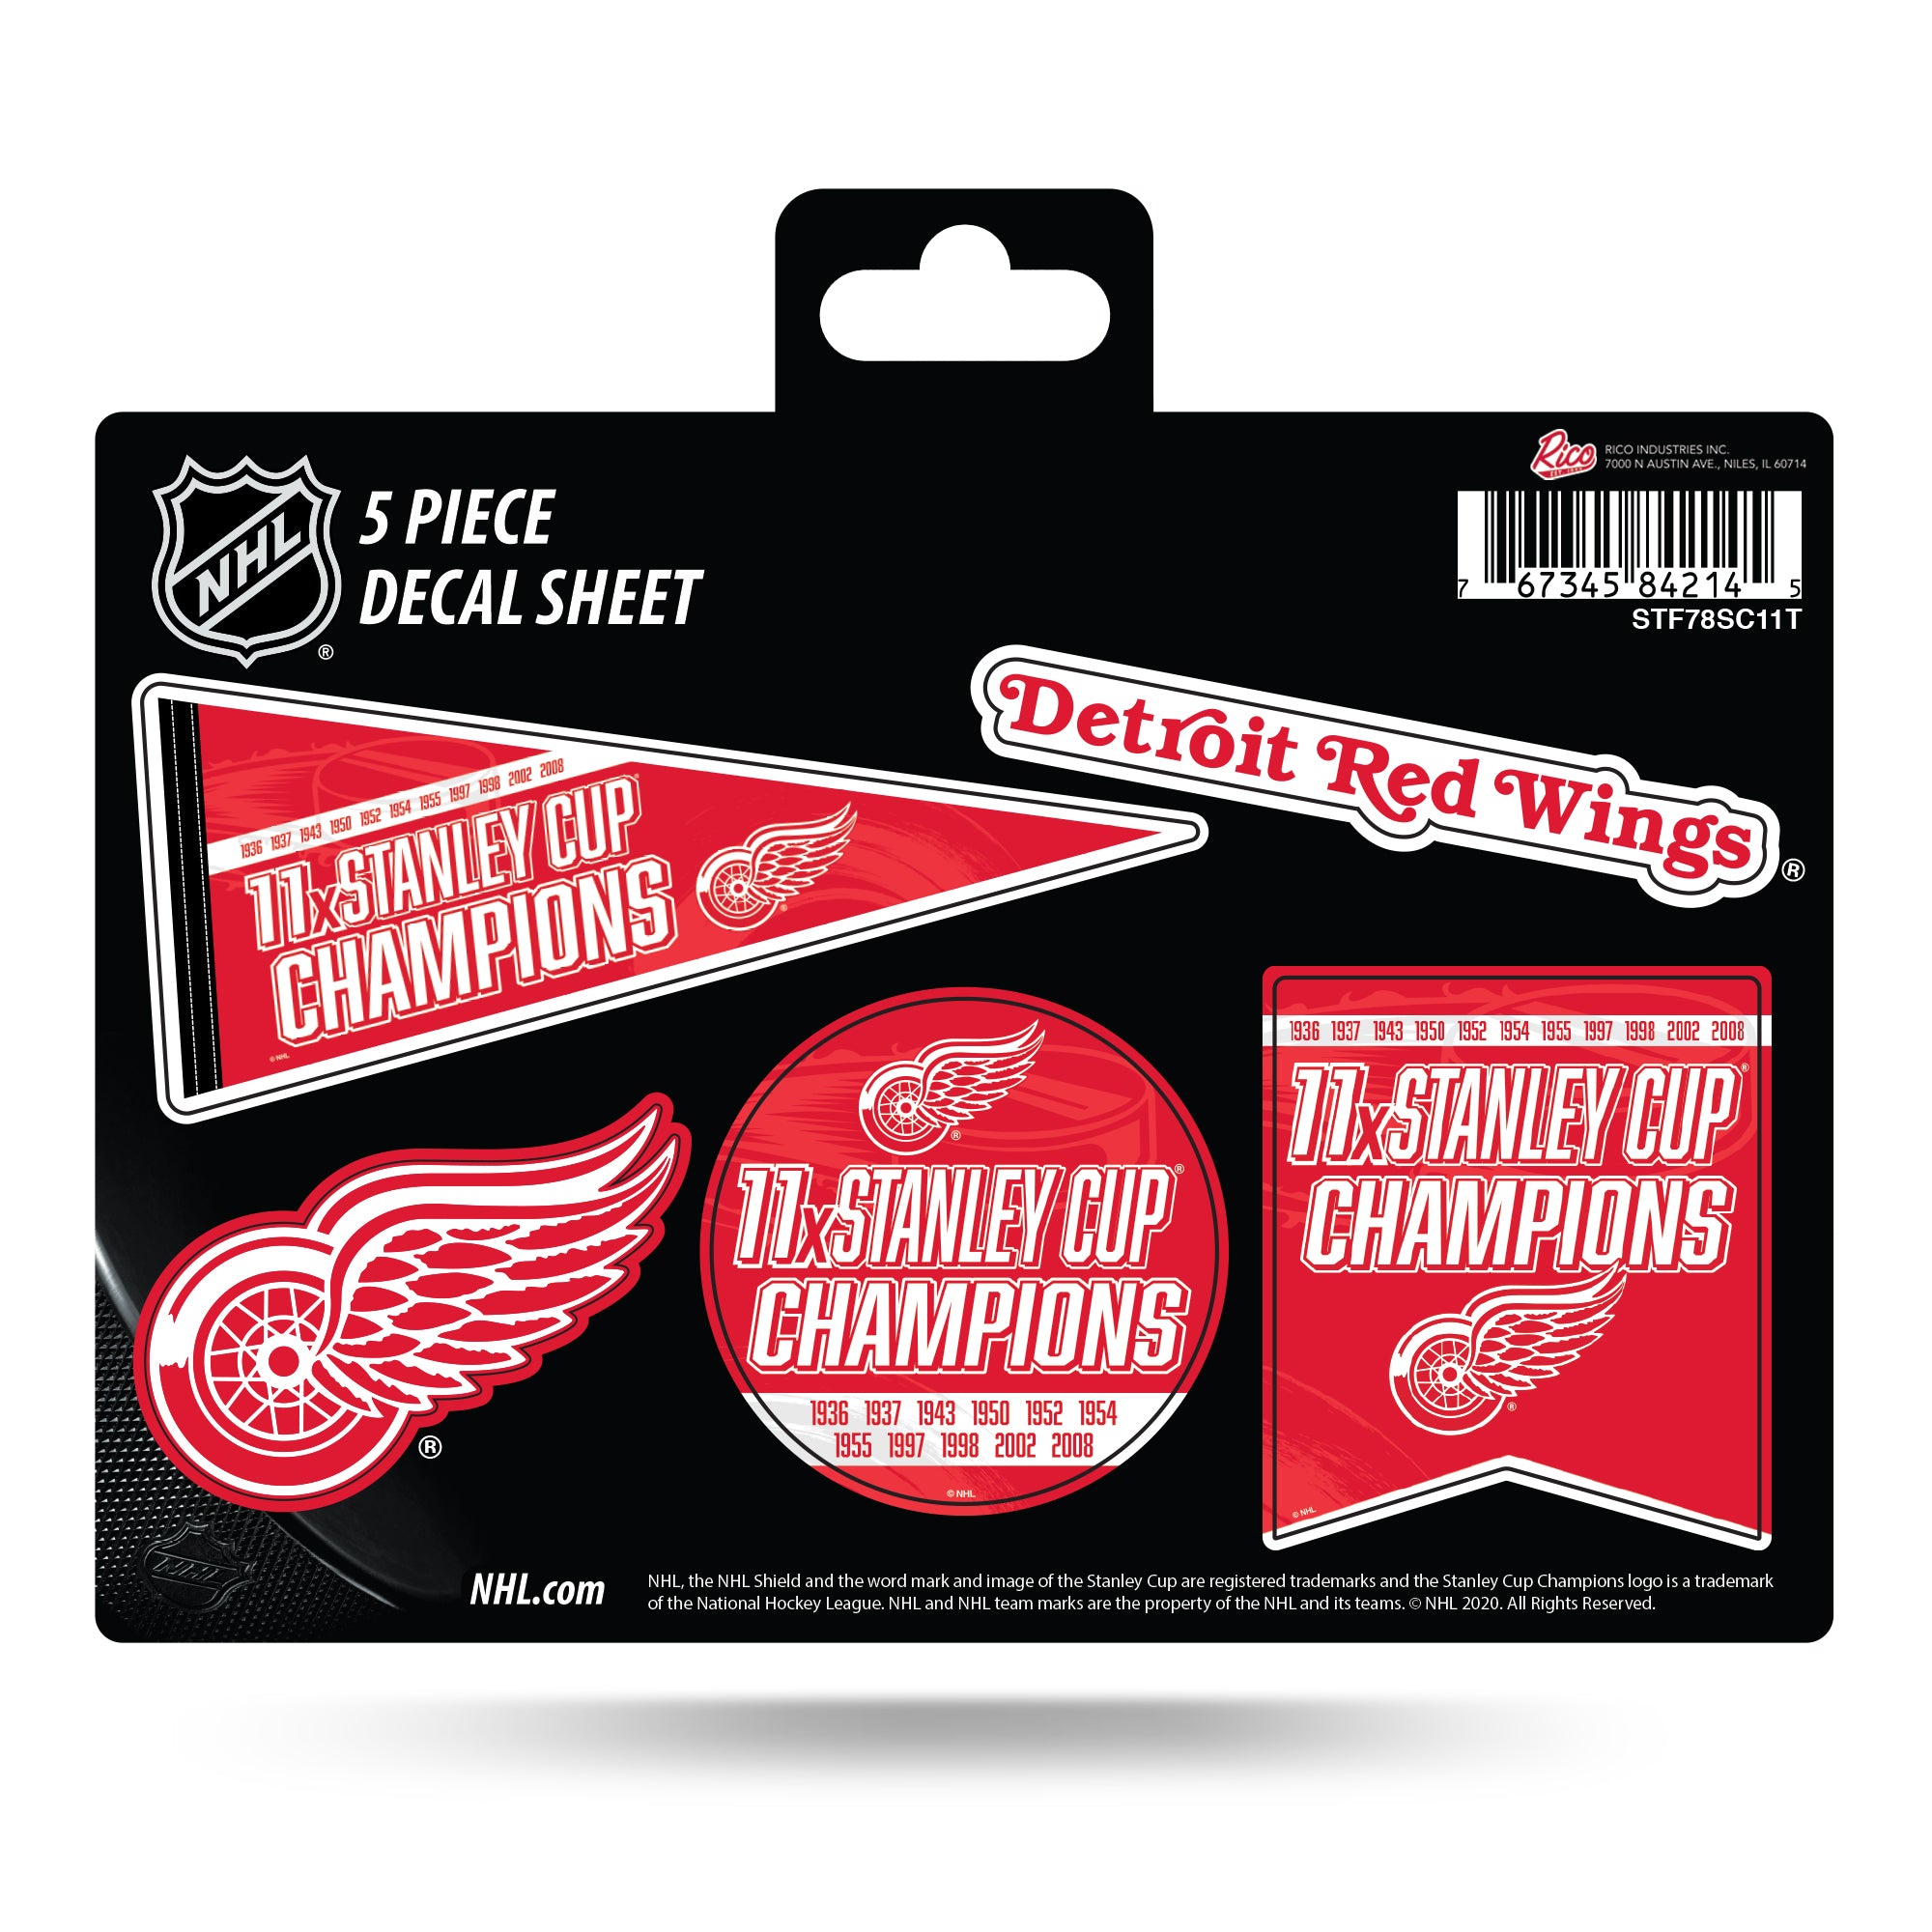 2008 Detroit Red Wings Stanley Cup champions t-shirt